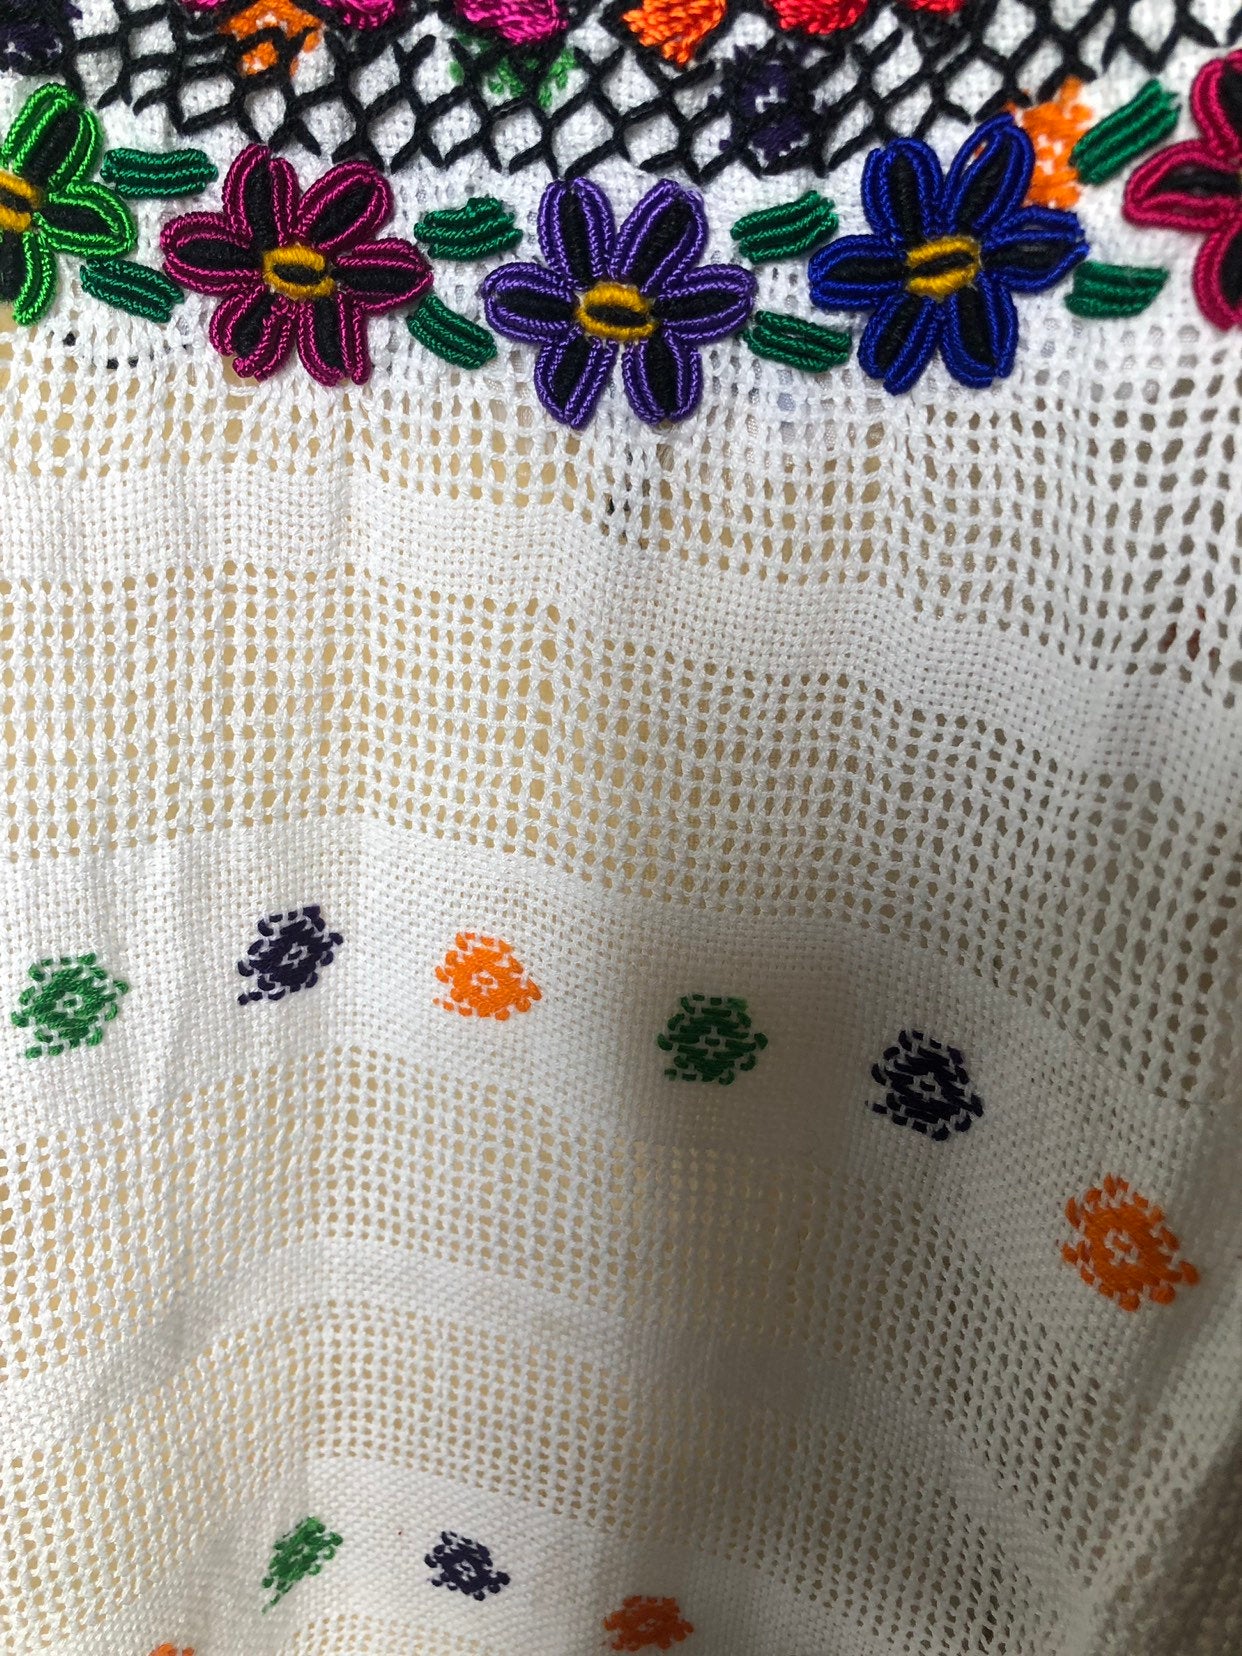 Handwoven Mexican Embroidery Huipil, White Embroidered Cape